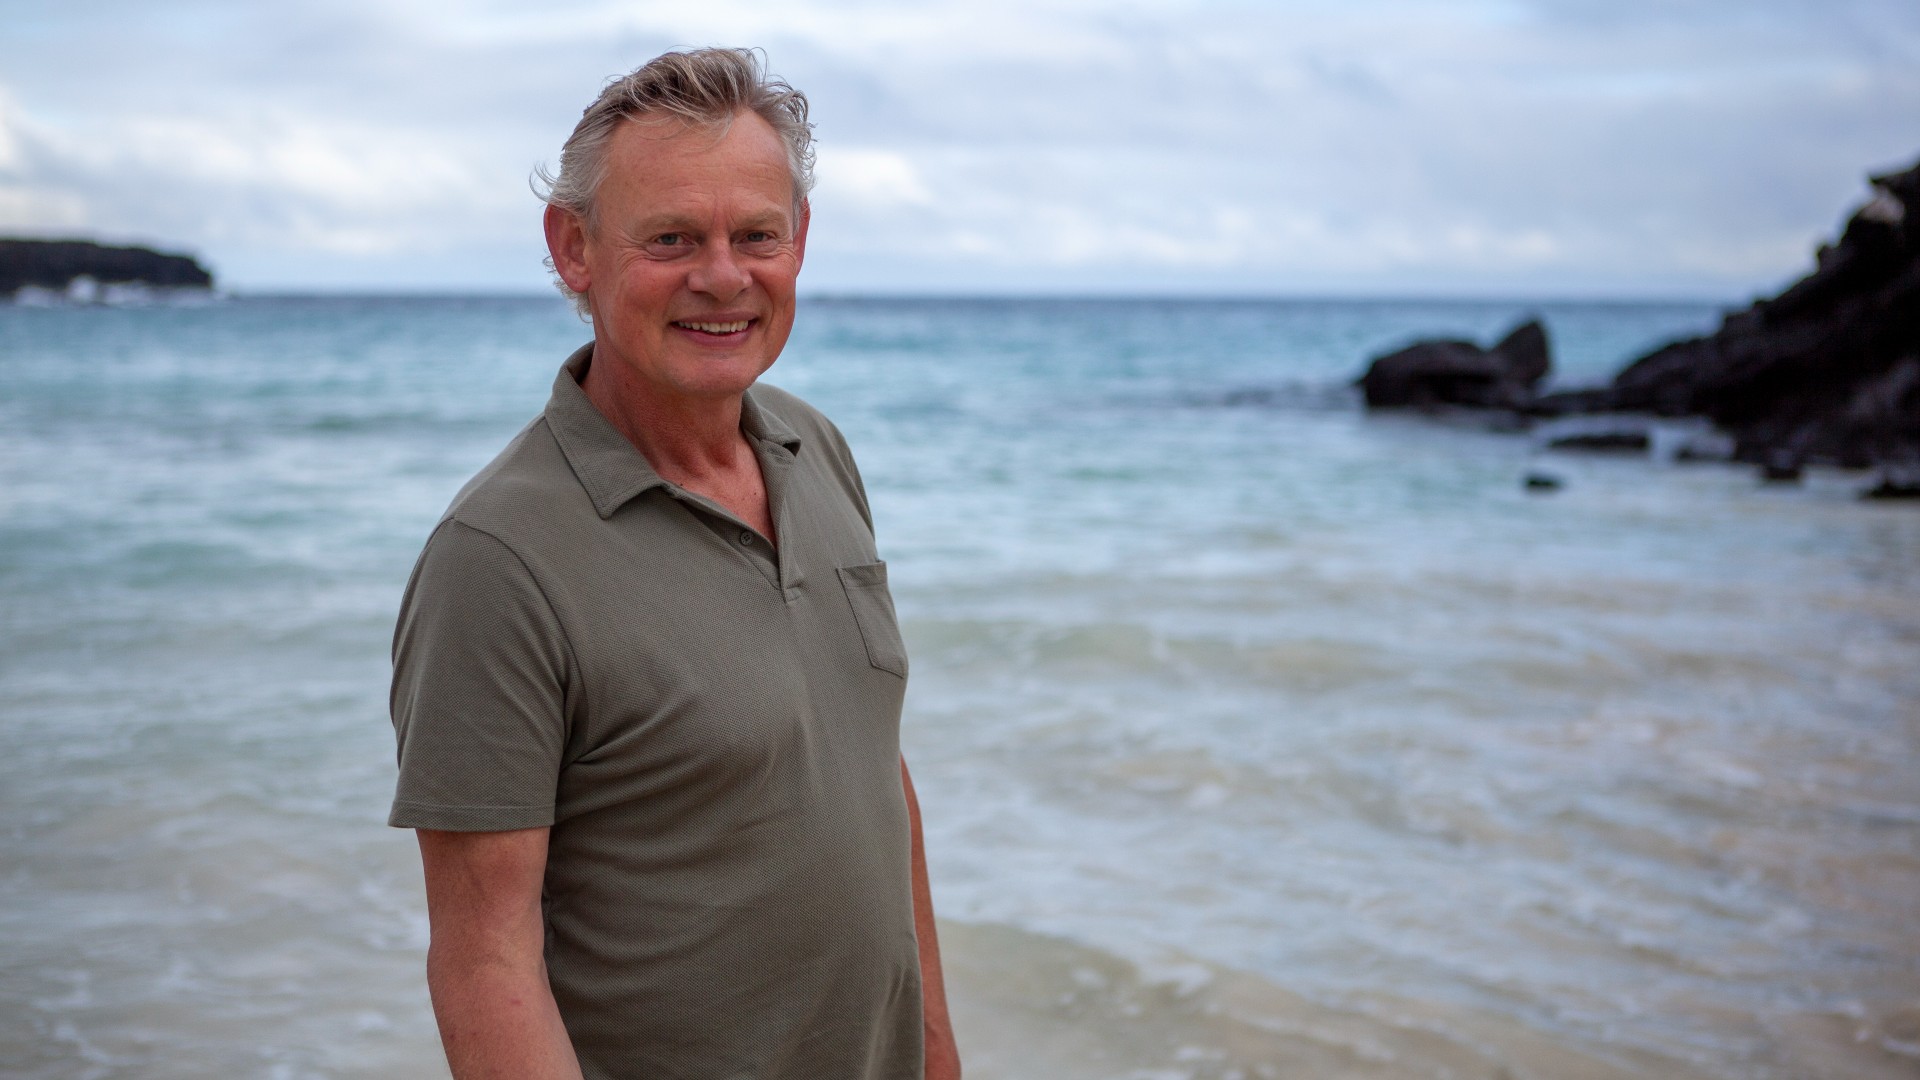 Martin Clunes: Islands of the Pacific